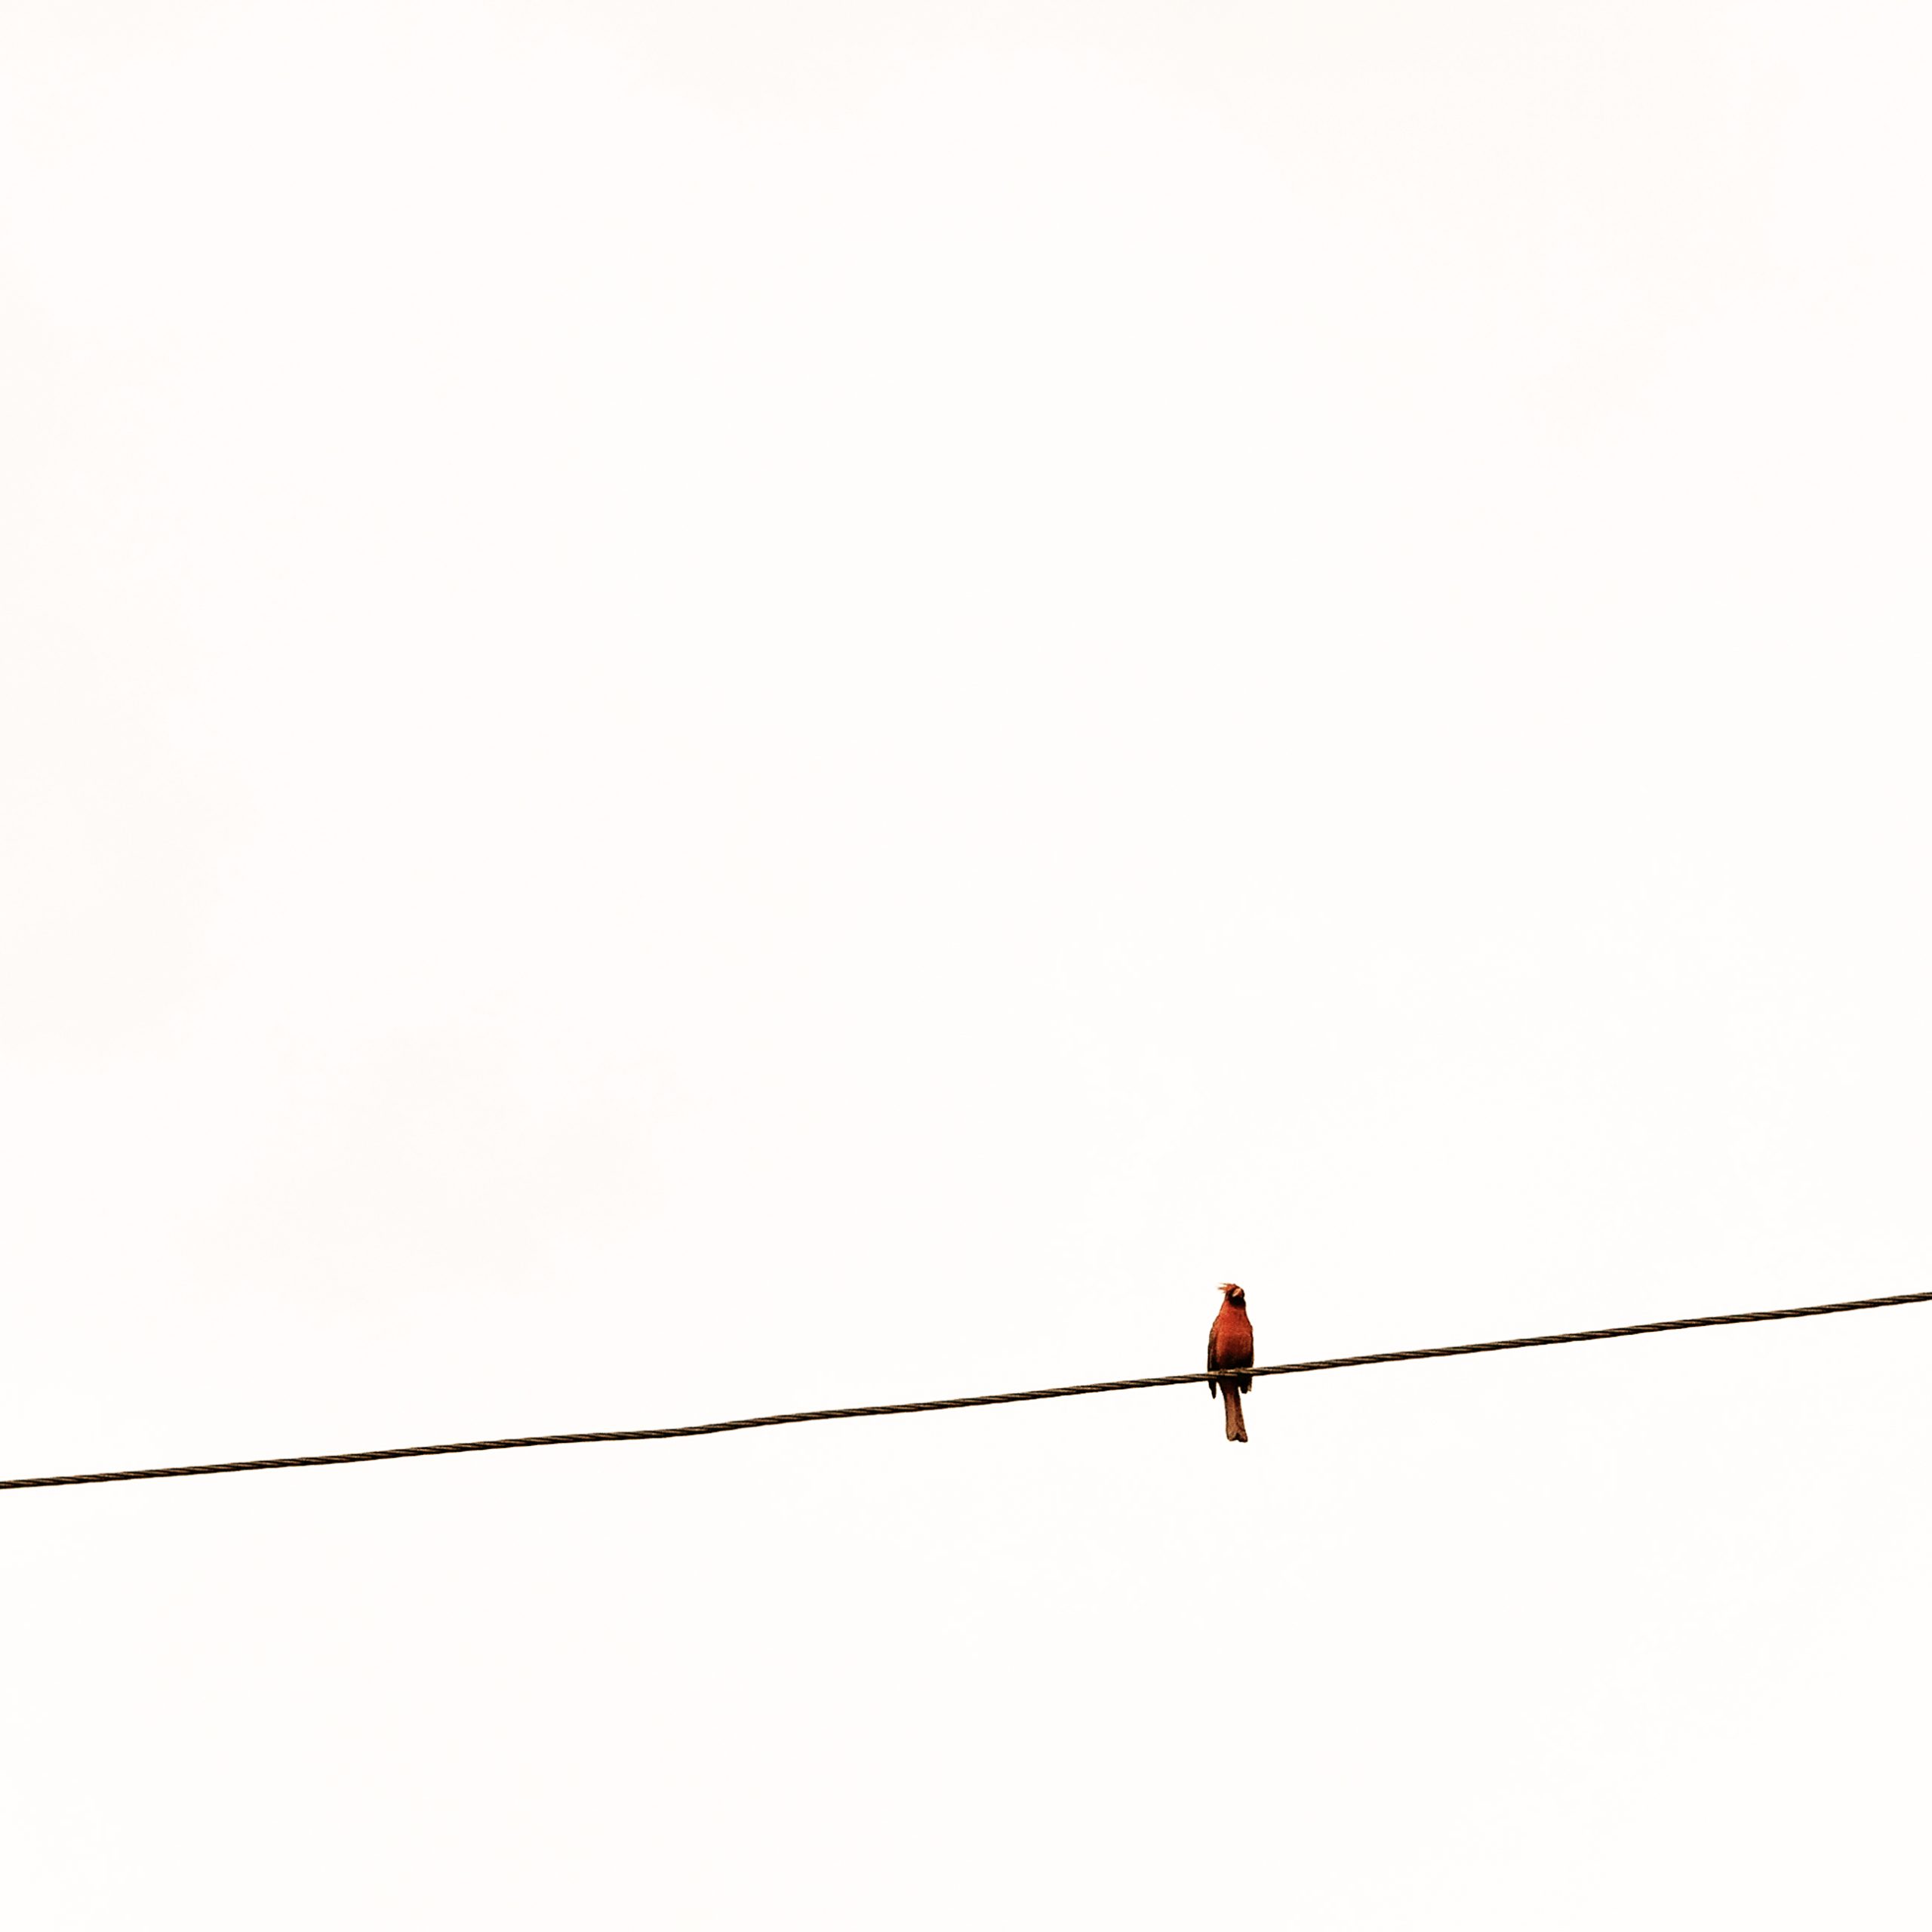 Read more about the article Contemplating Humanity and Nature: A Morning Encounter with a Bird on a Powerline